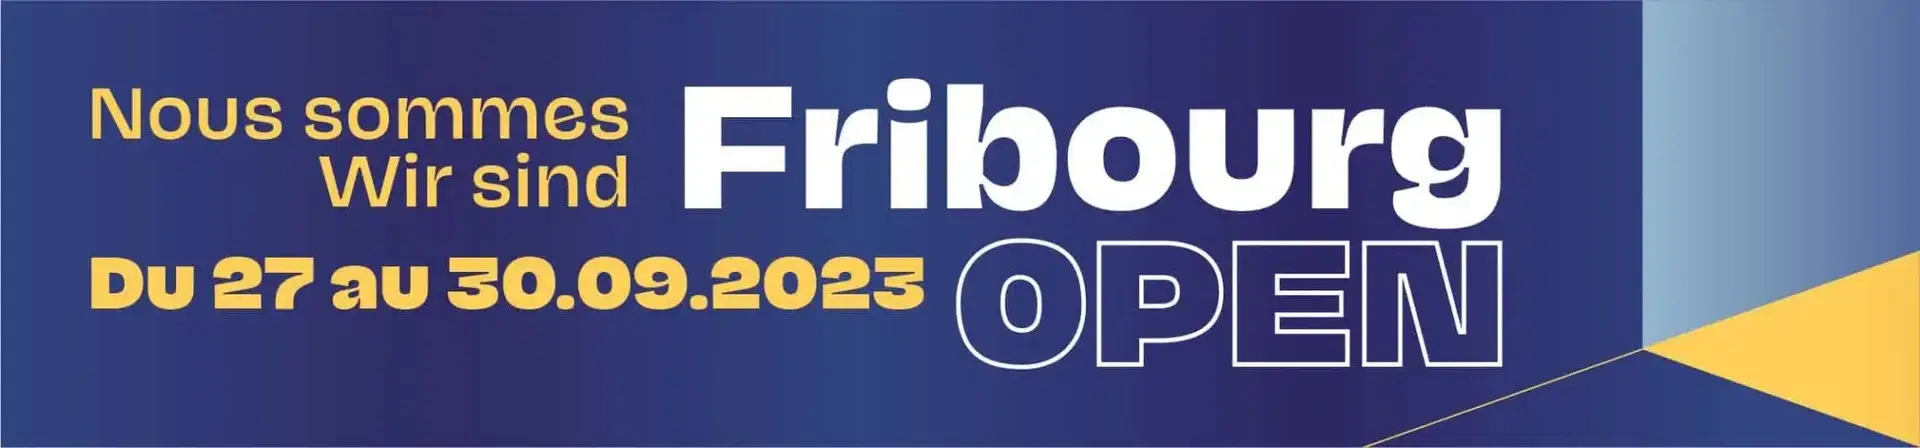 Fribourg Open 2023